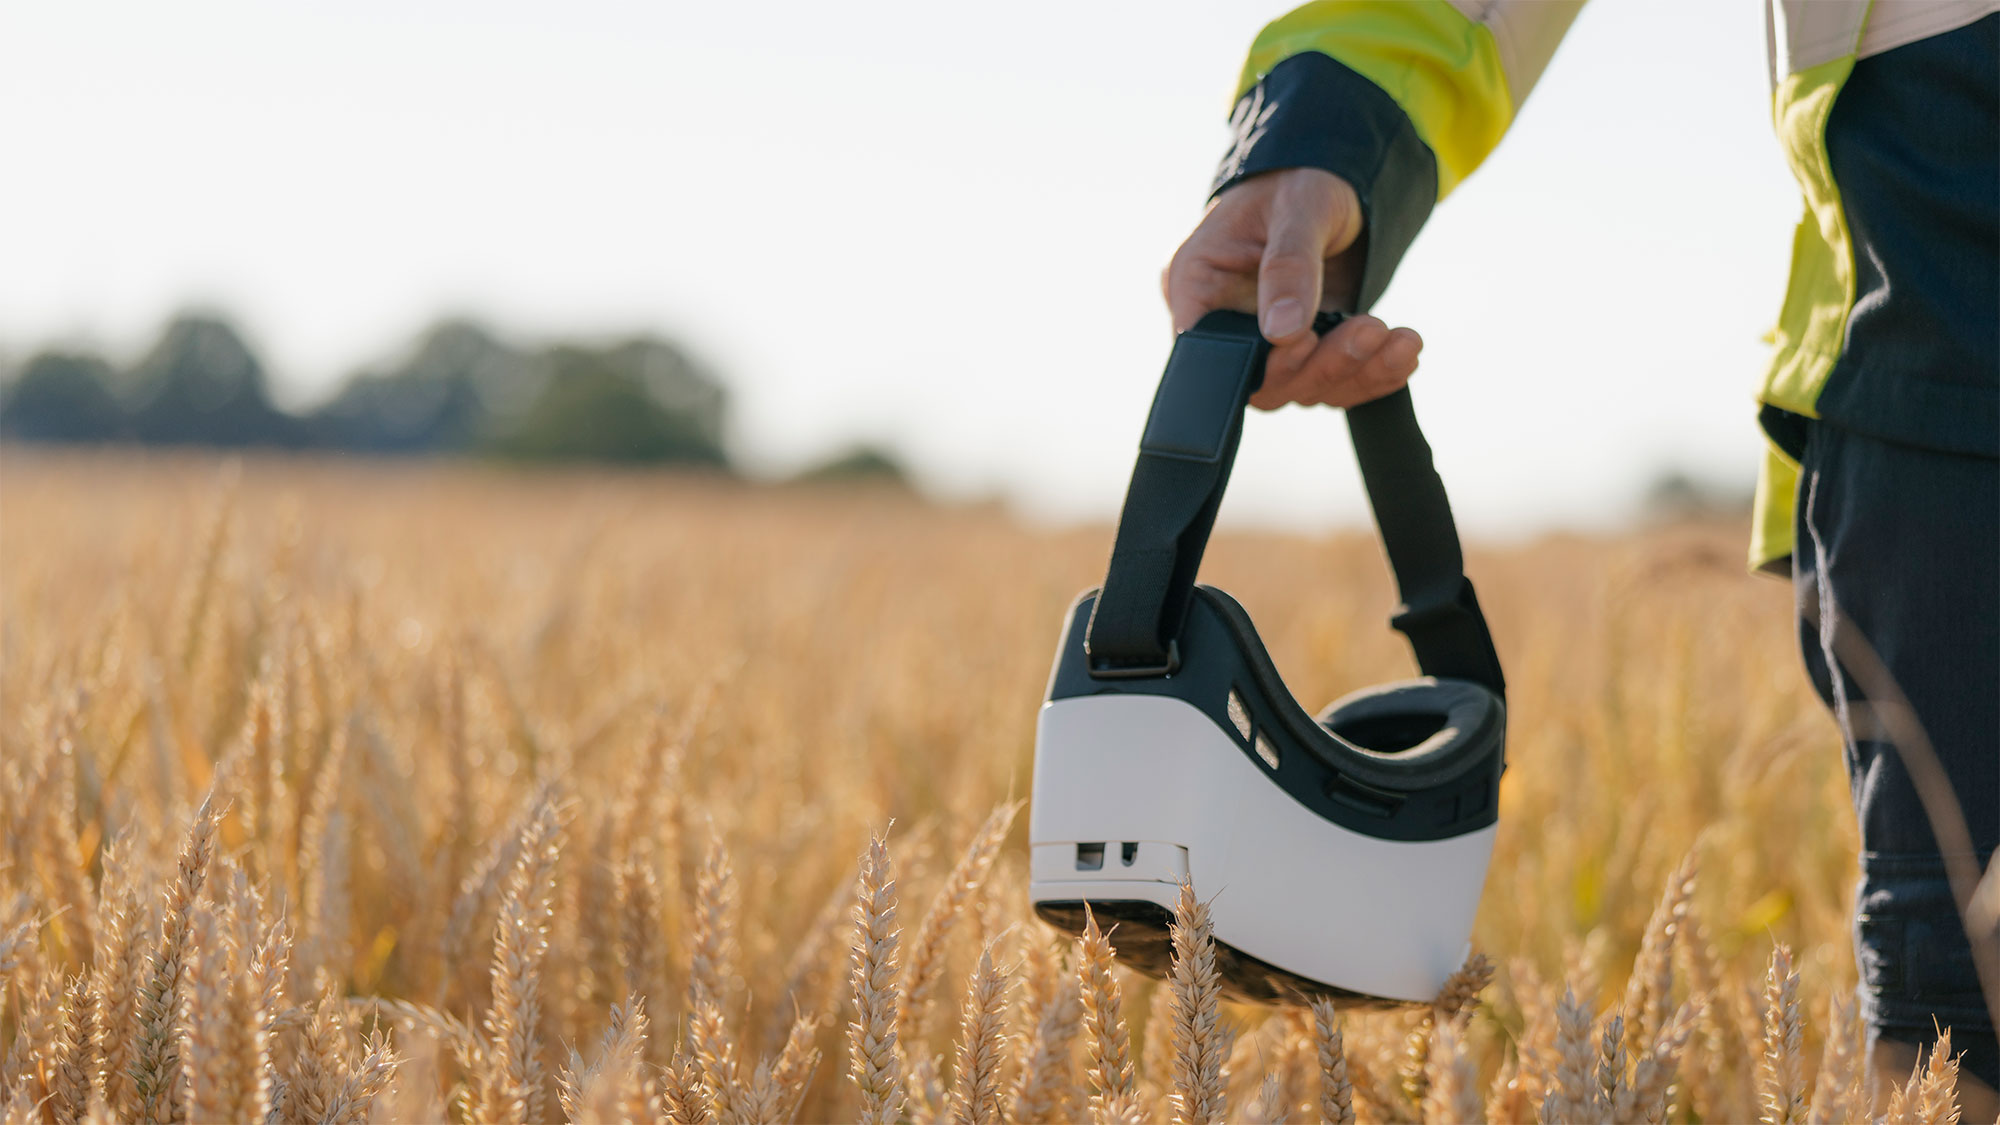 The hand of a farmer is wearing virtual reality glasses in a cornfield. With 5G and new technologies, farmers can manage their land more efficiently and control processes remotely.